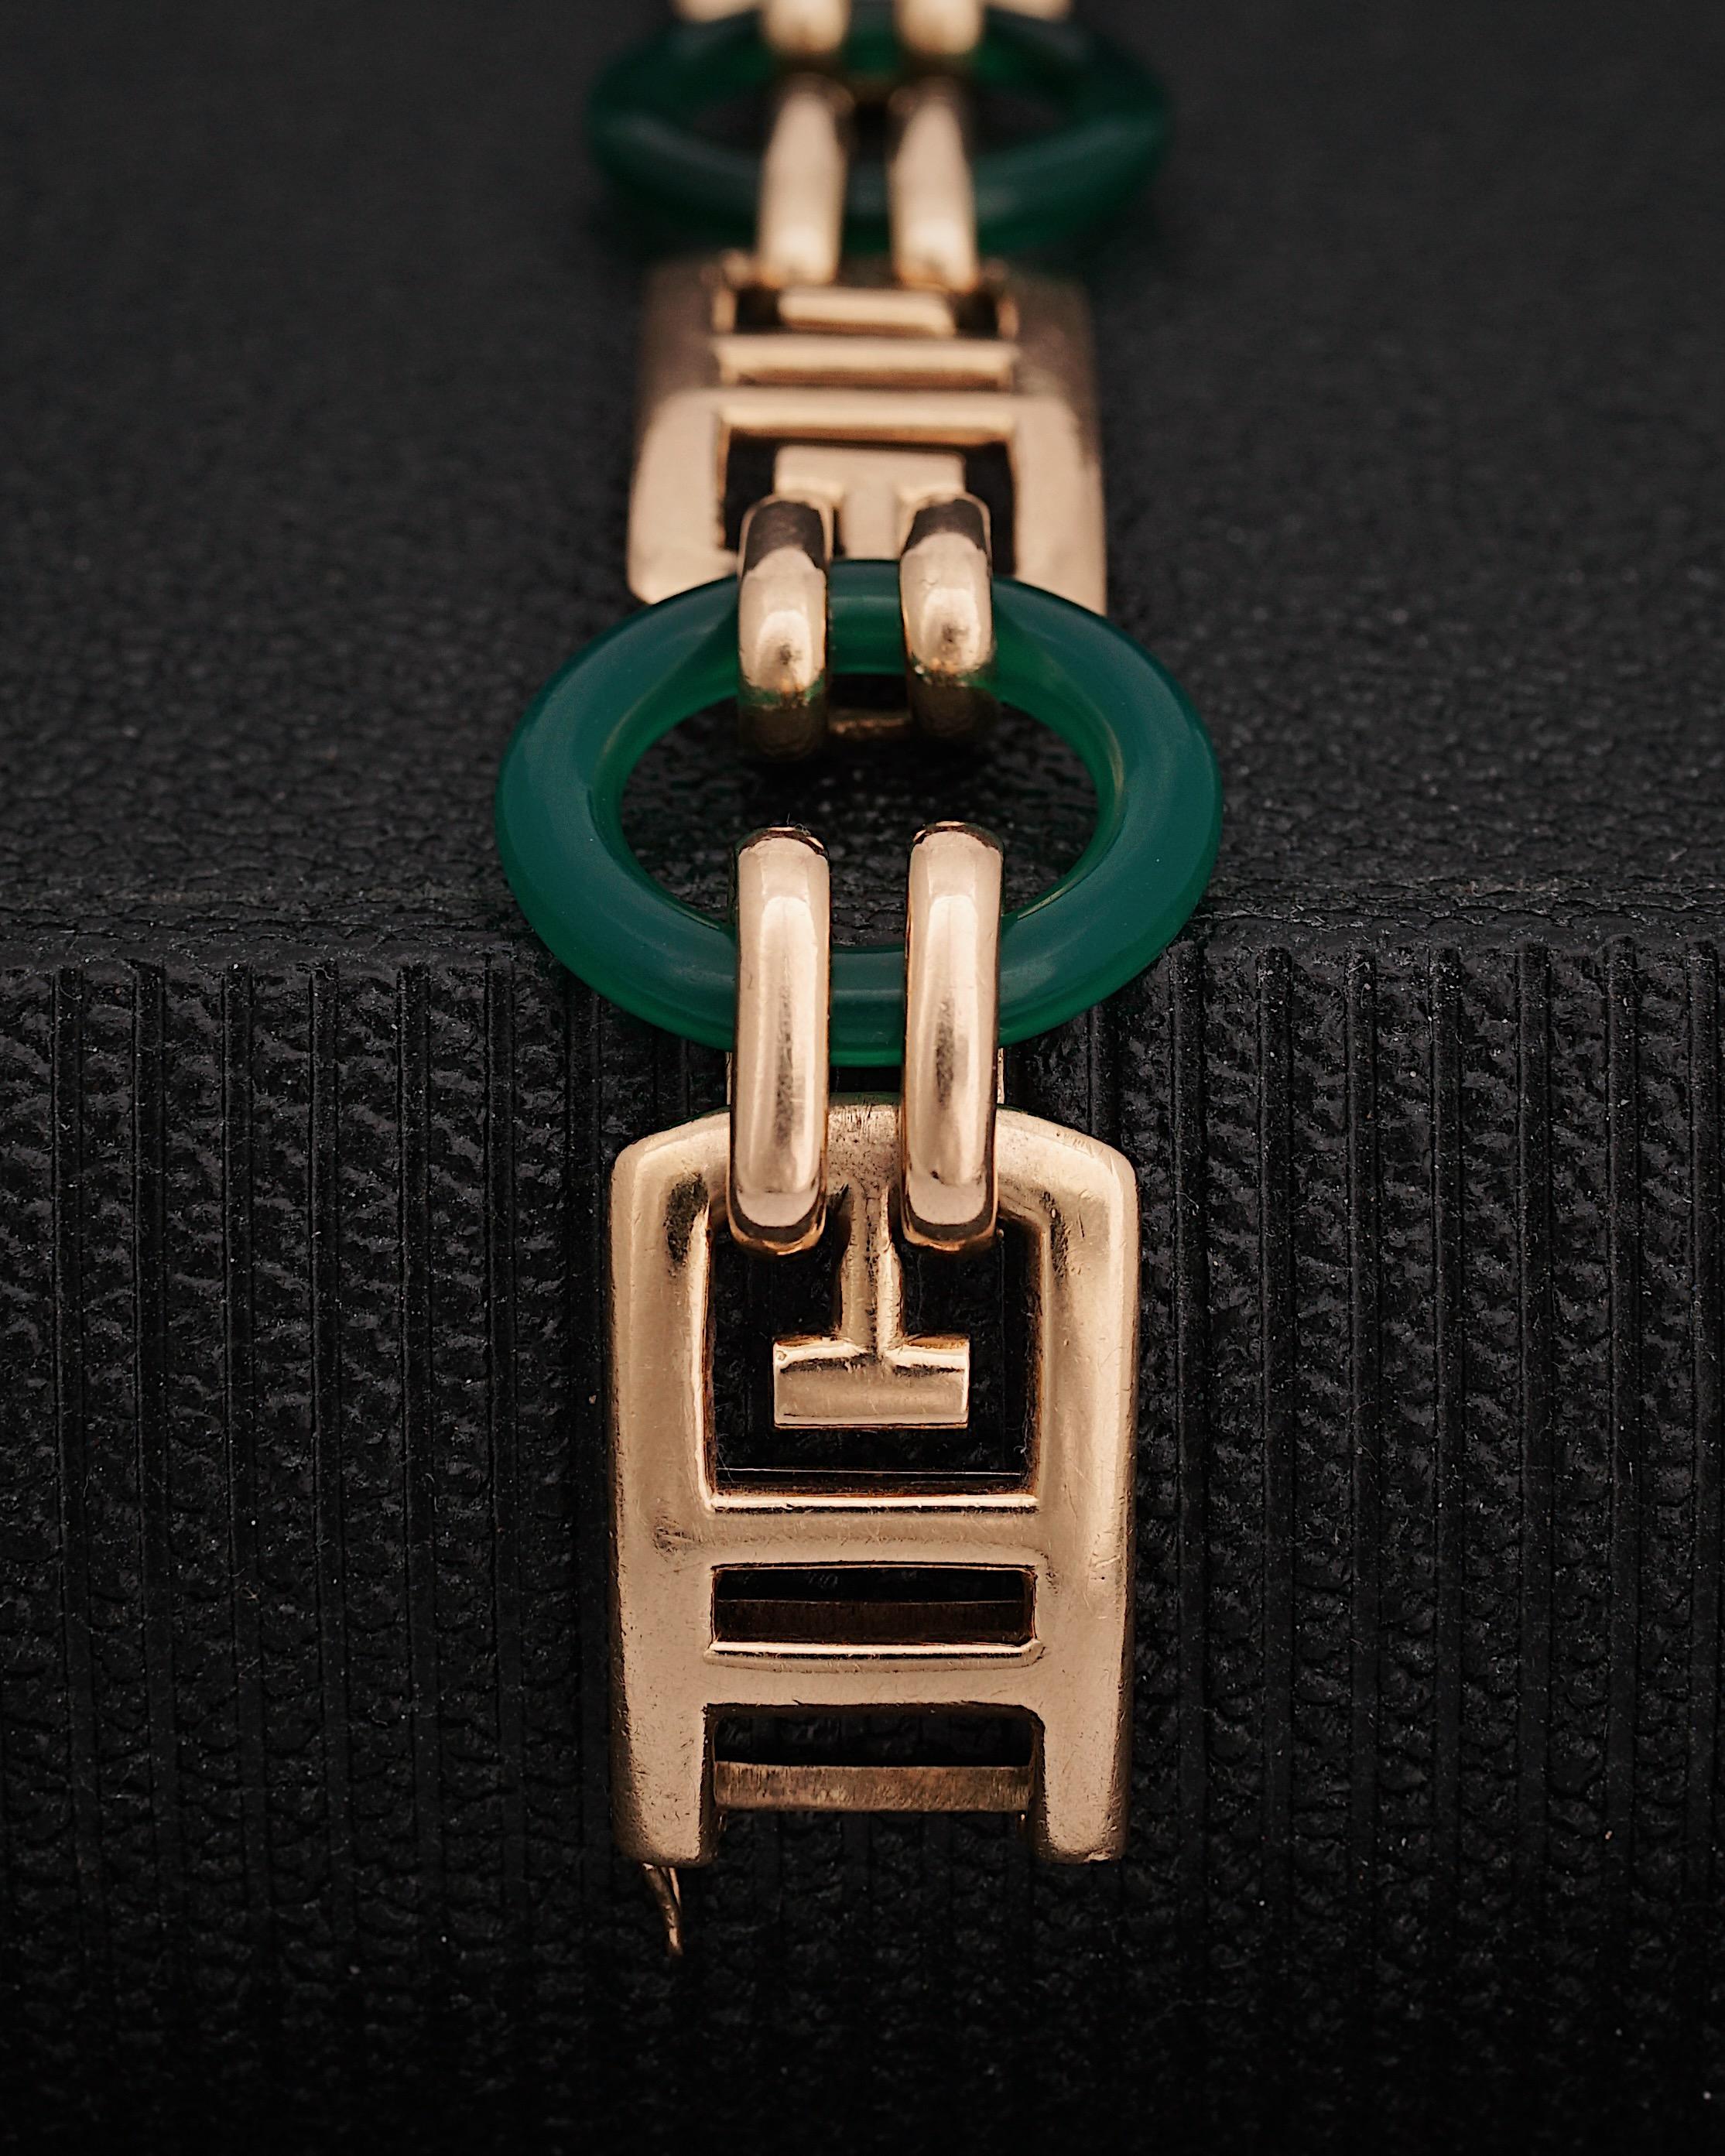 Georges Lenfant
Rare Art Deco 18k Gold & Chrysoprase Link Bracelet, Late 1930s
Wears the Georges Lenfant maker's mark. Numbered 422
Weight : 47 grams
Beautiful Condition.

This is a rare and timeless collectible Item created by Georges Lenfant,